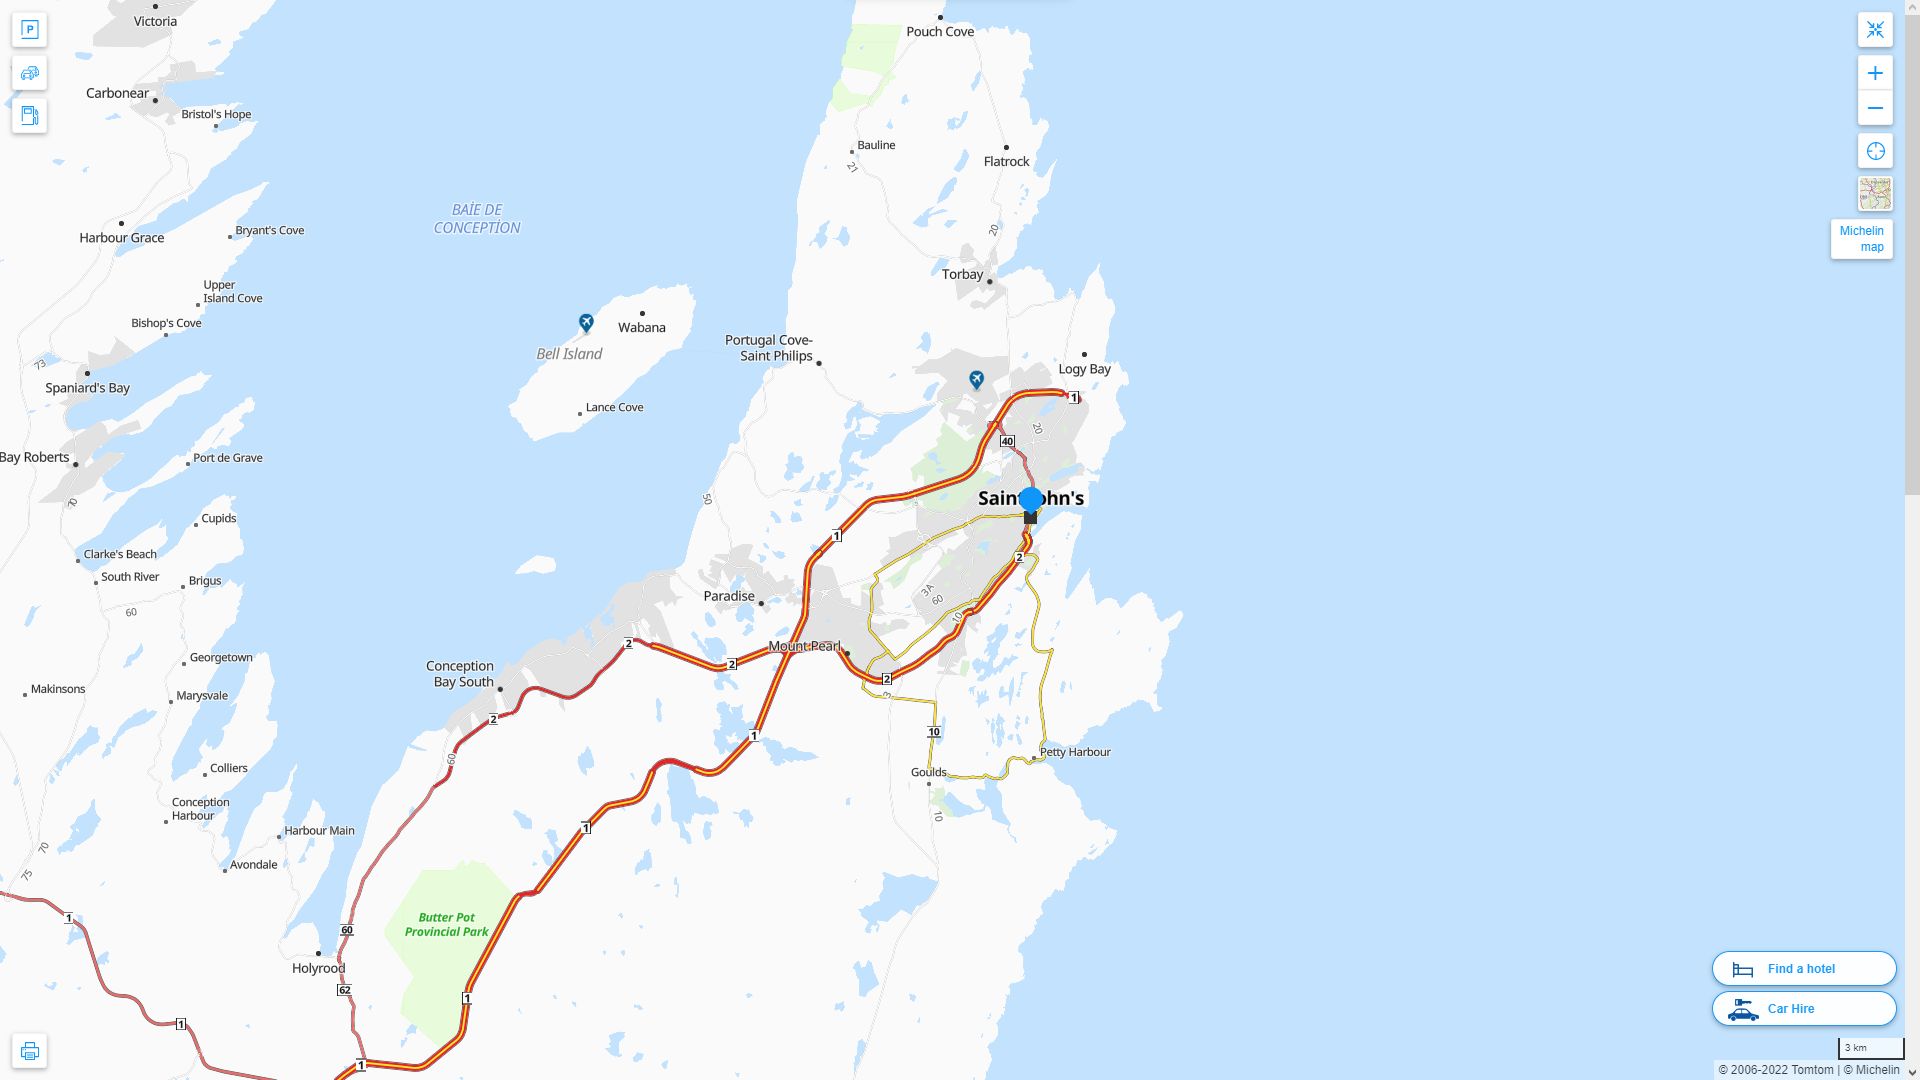 St. John's Highway and Road Map